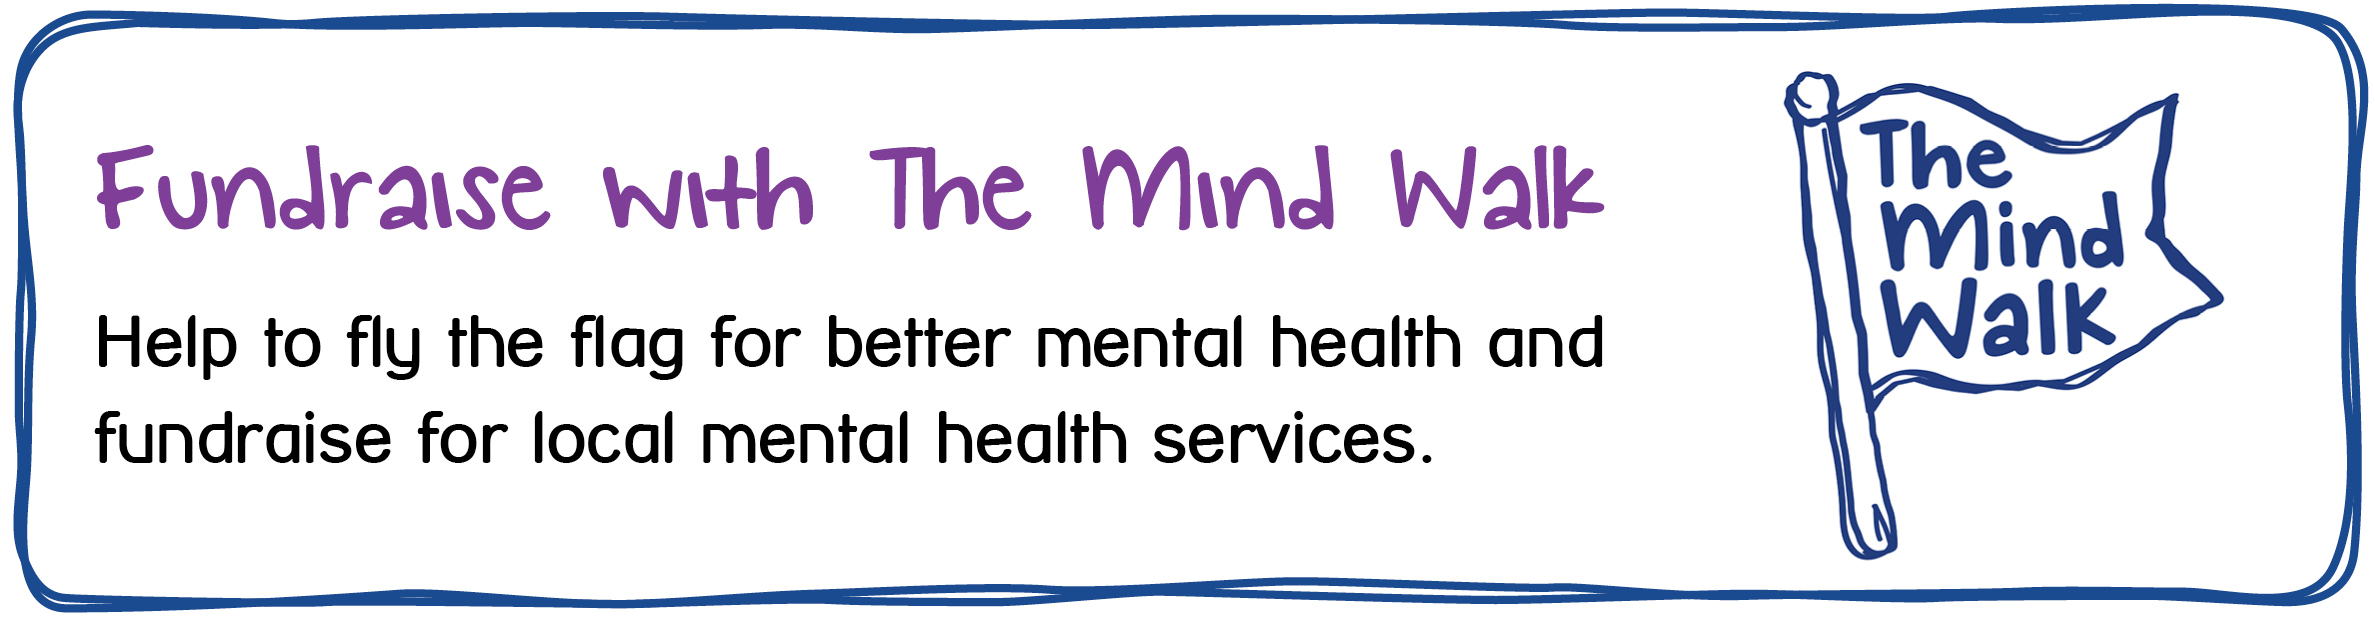 Fundraise with The Mind Walk. Help to fly the flag for better mental health and fundraise for local mental health services.